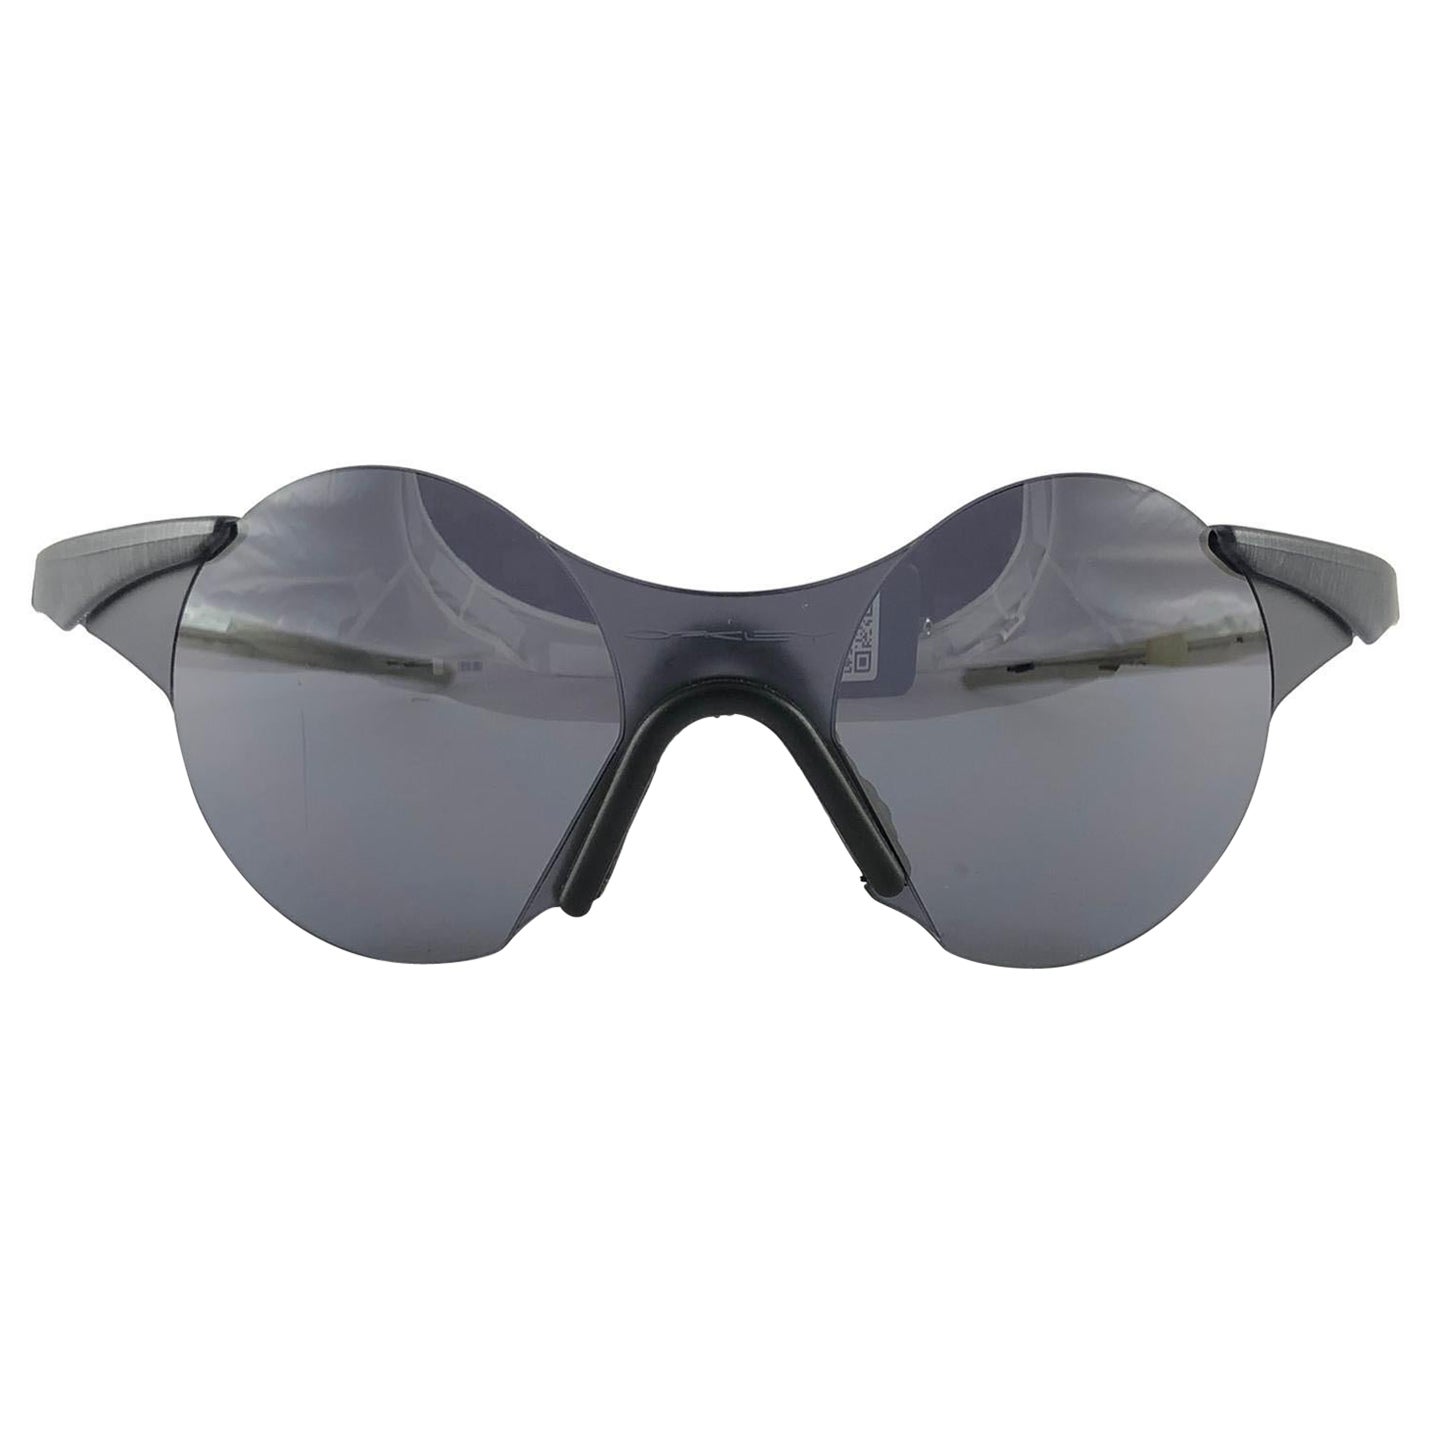 New Vintage Rare Sports Oakley Wrap Around Grey Mirror Lens 1980's Sunglasses  For Sale